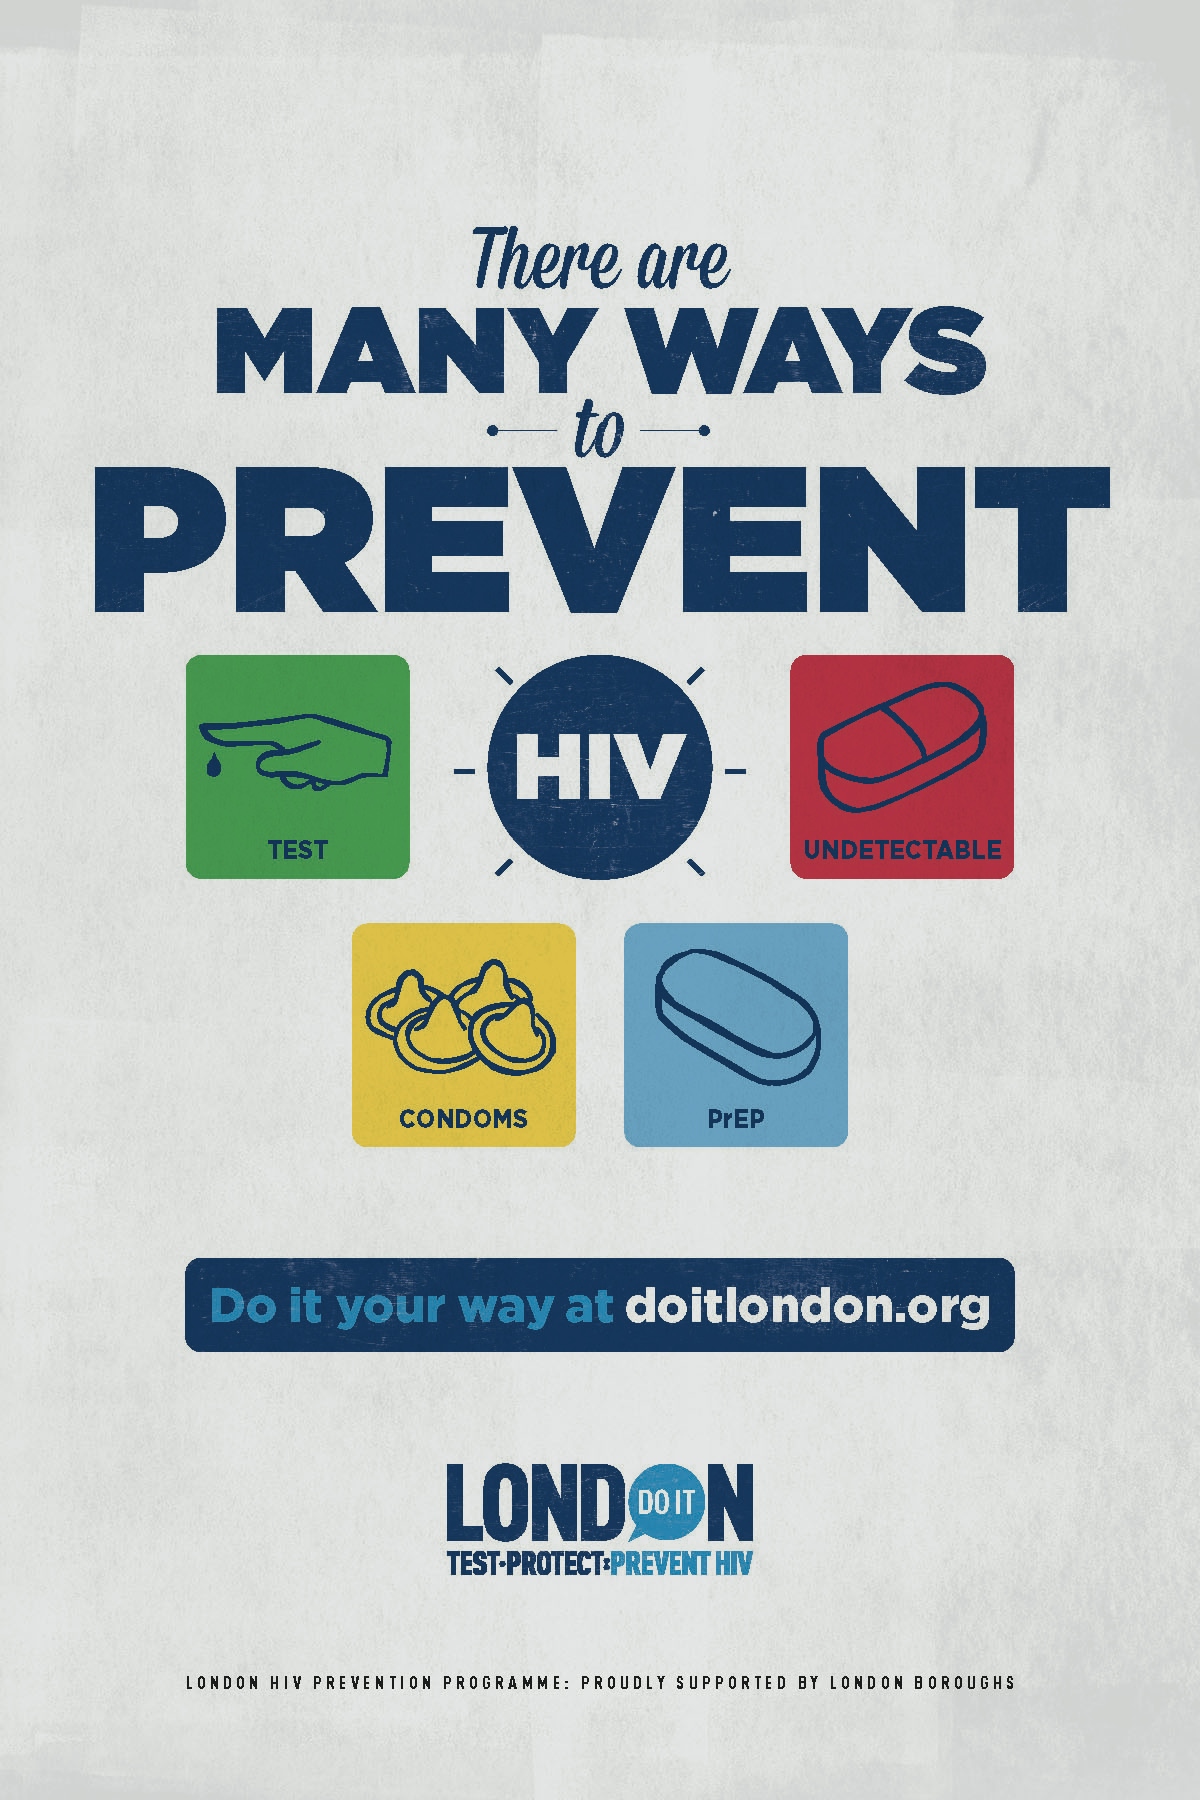 Do It London campaign poster, stating "There are many ways to prevent HIV" with four suggestions in colourful boxes: test, condoms, undetectable, PrEP.